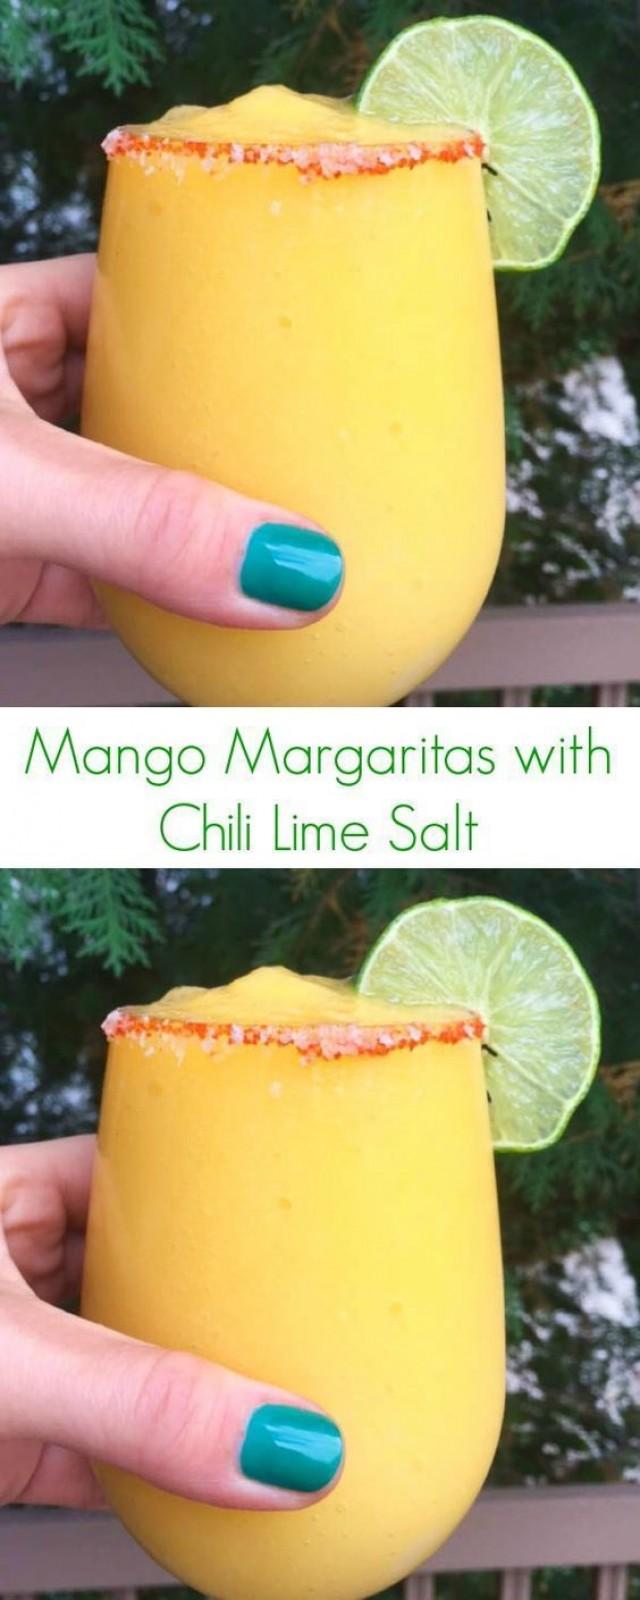 Mango Margaritas With Chili Lime Salt Recipe The Perfect Combination